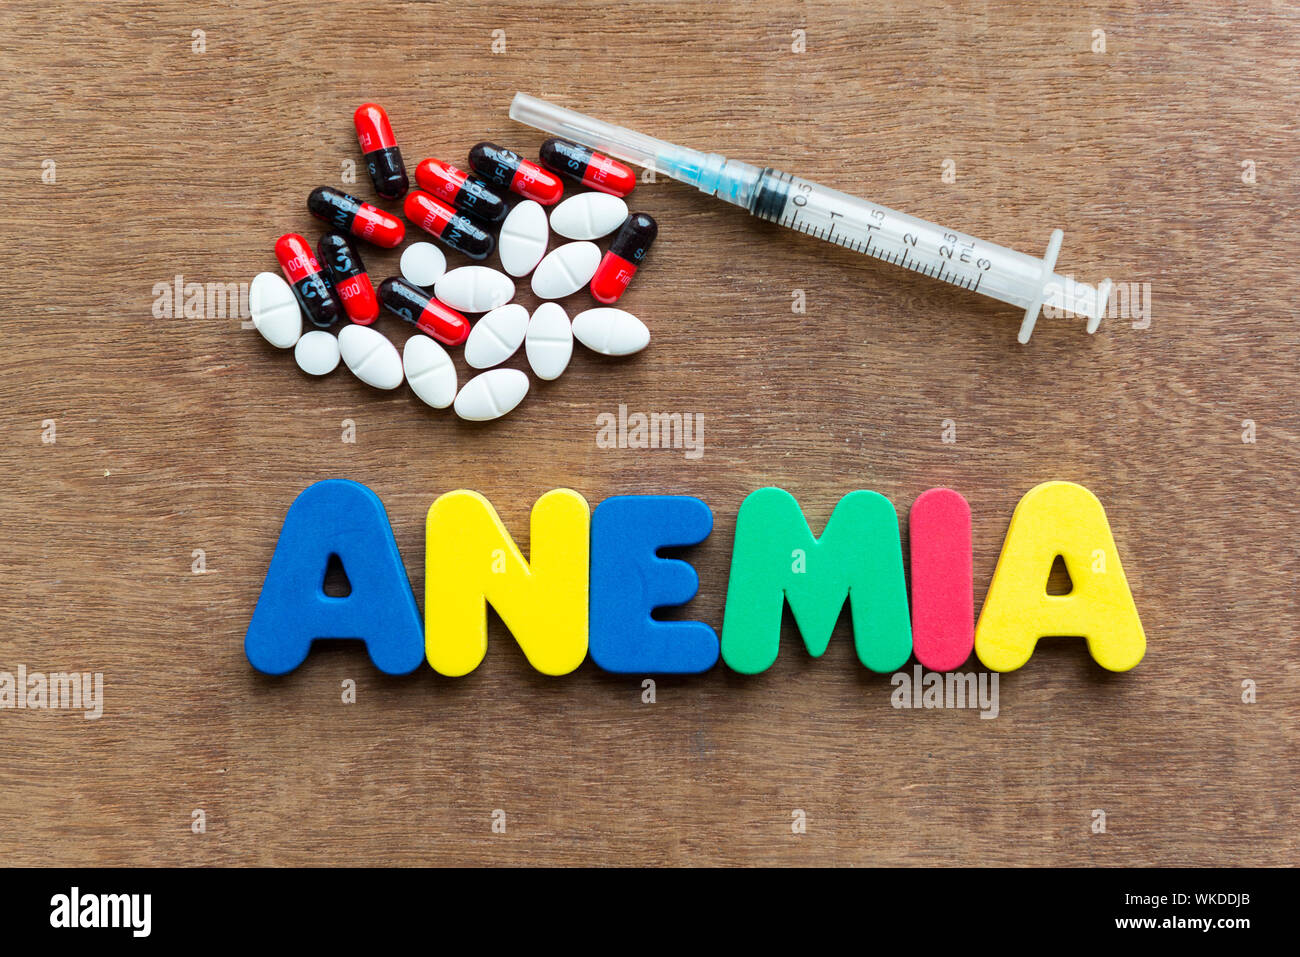 Close-up Of Multi Colored Anemia Text With Pills And Syringe On Table Stock Photo